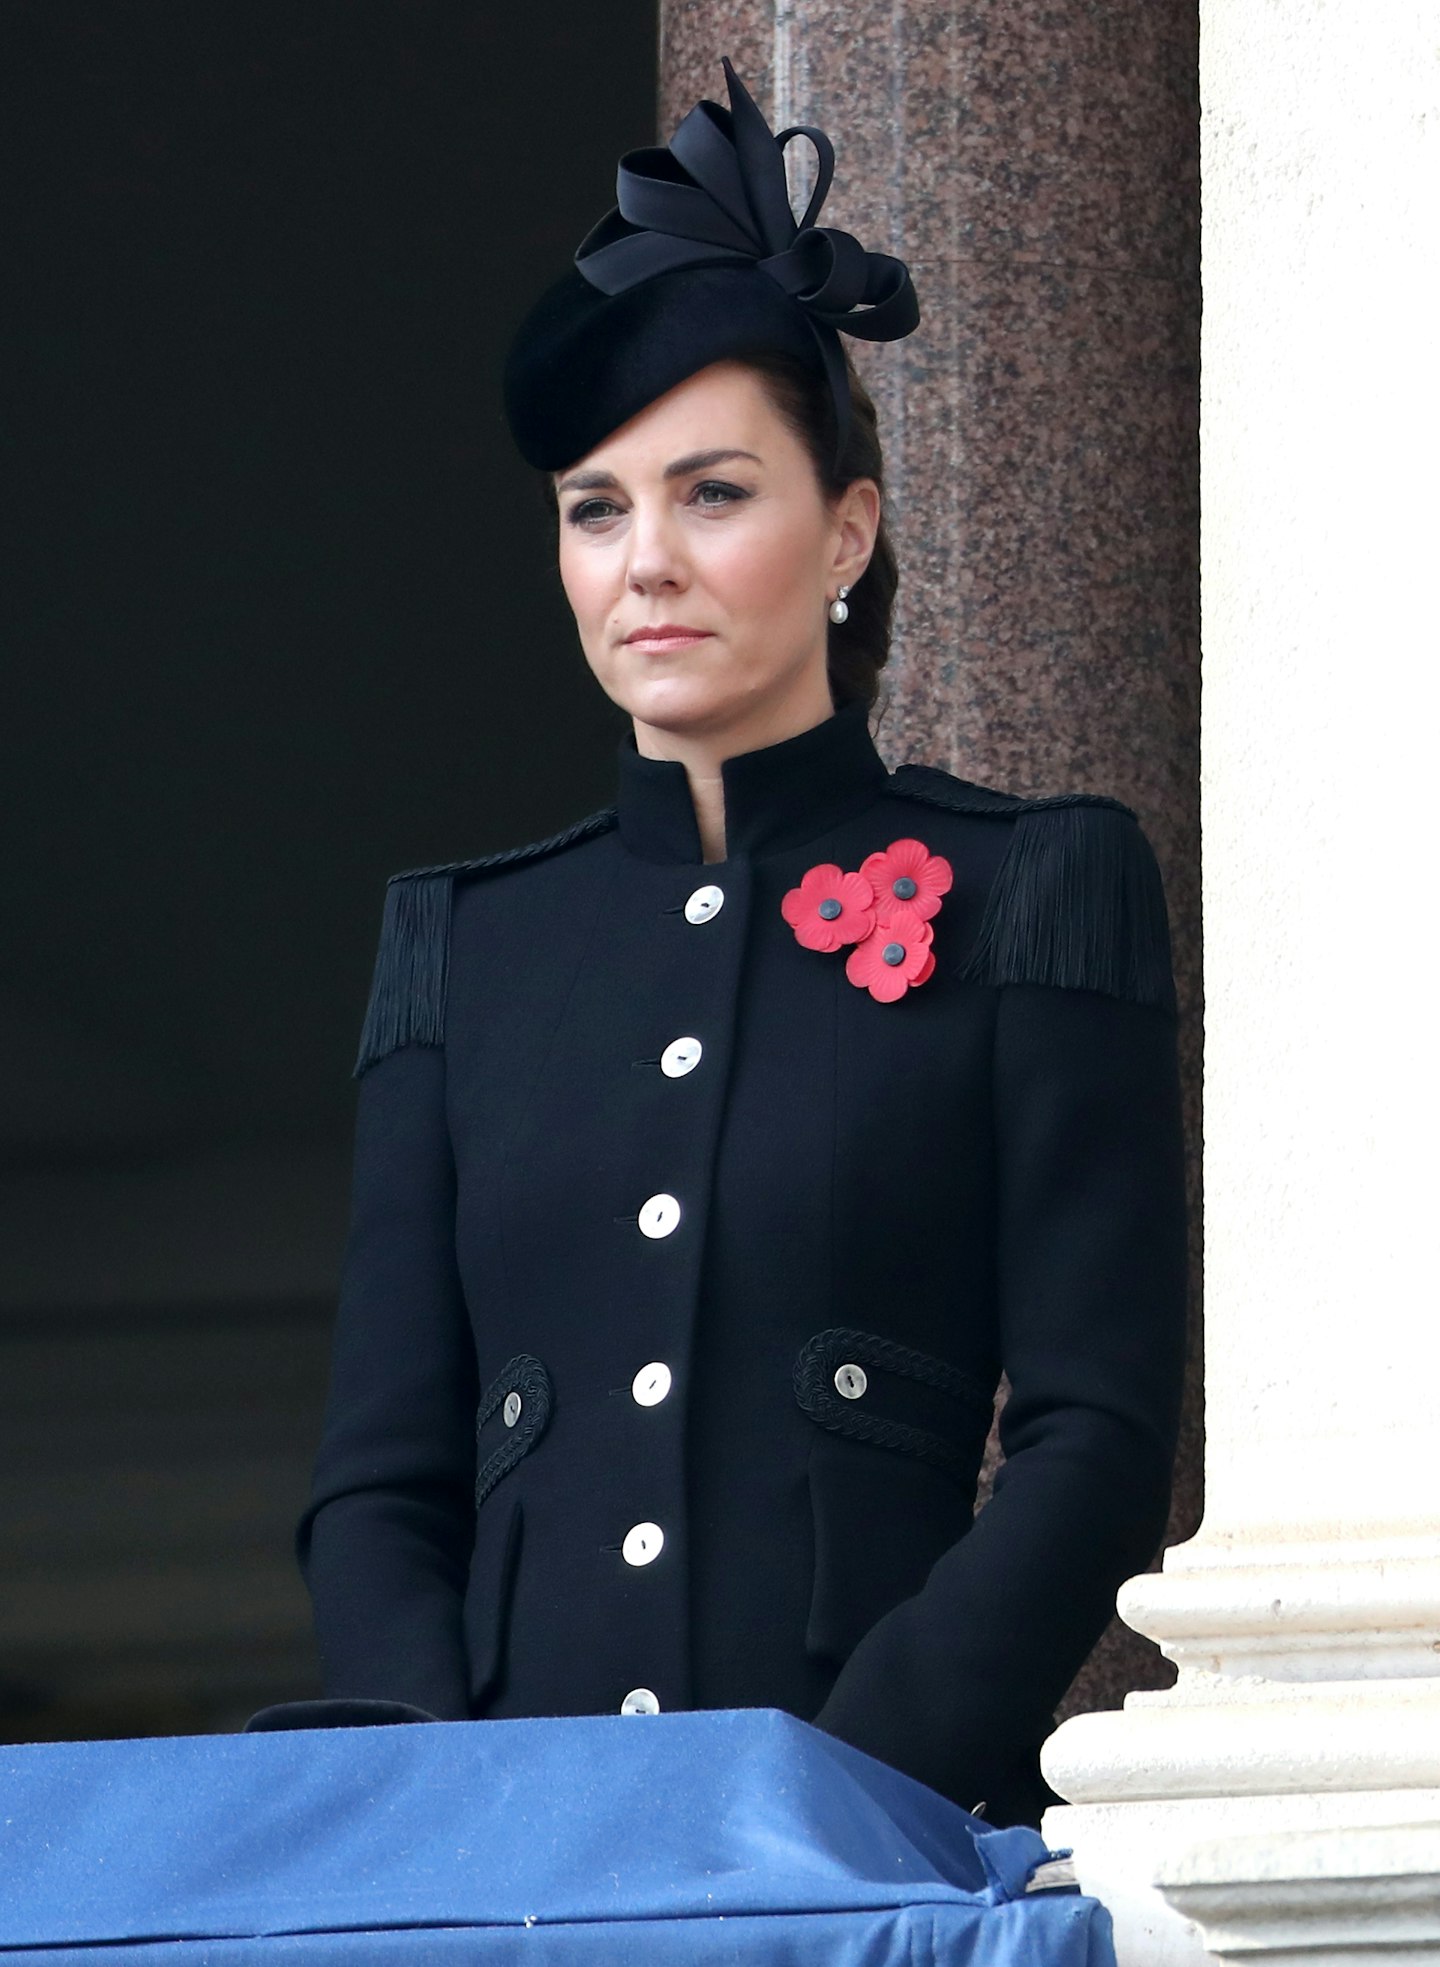 The Duchess of Cambridge on Remembrance Sunday 